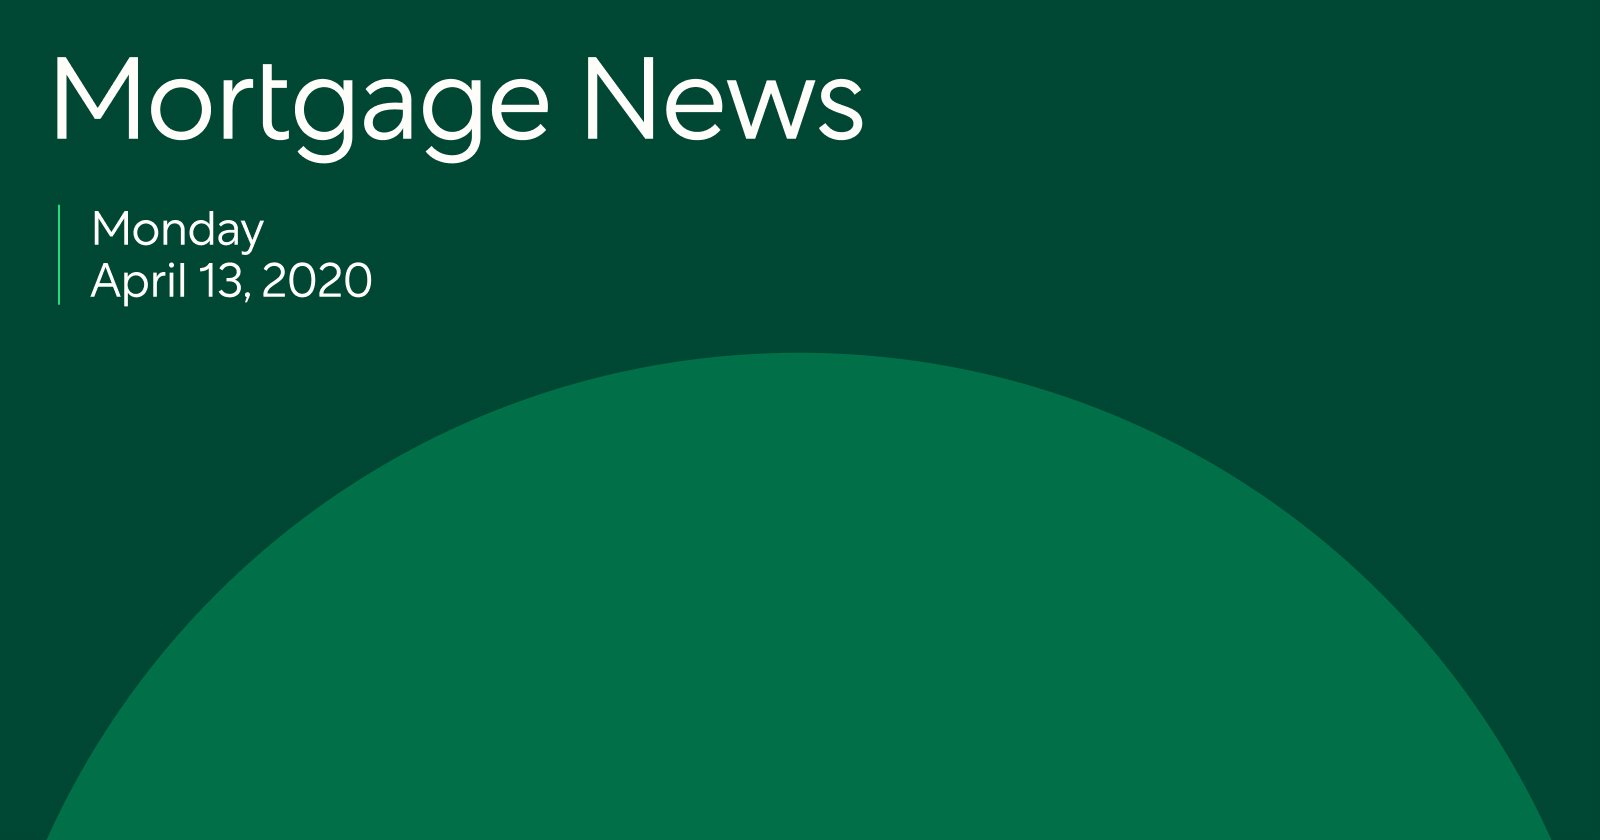  Mortgage News: Published by Better April 13, 2020